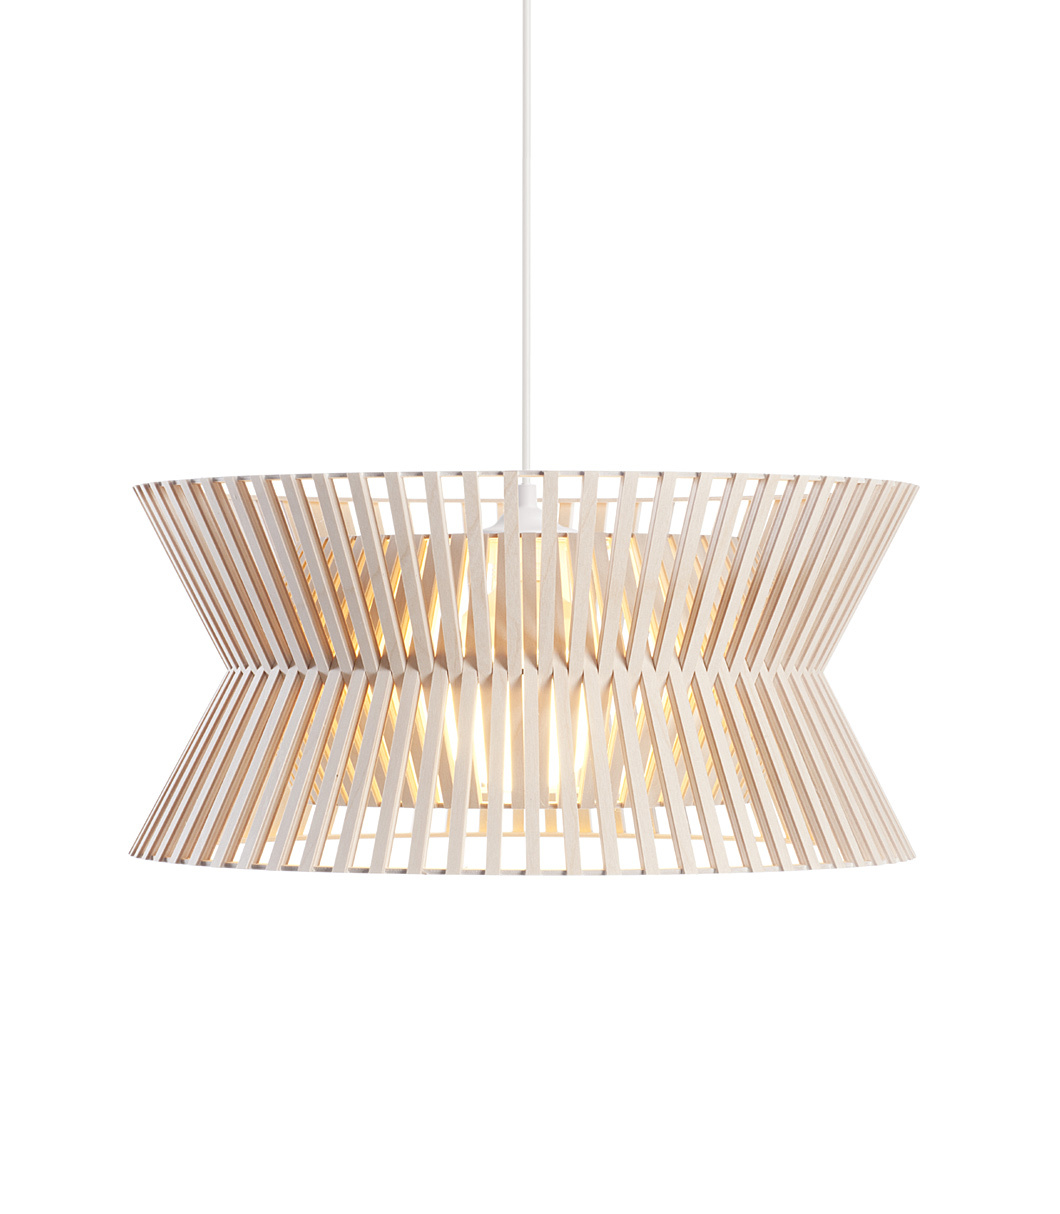 Kontro 6000 pendant lamp is available in natural birch